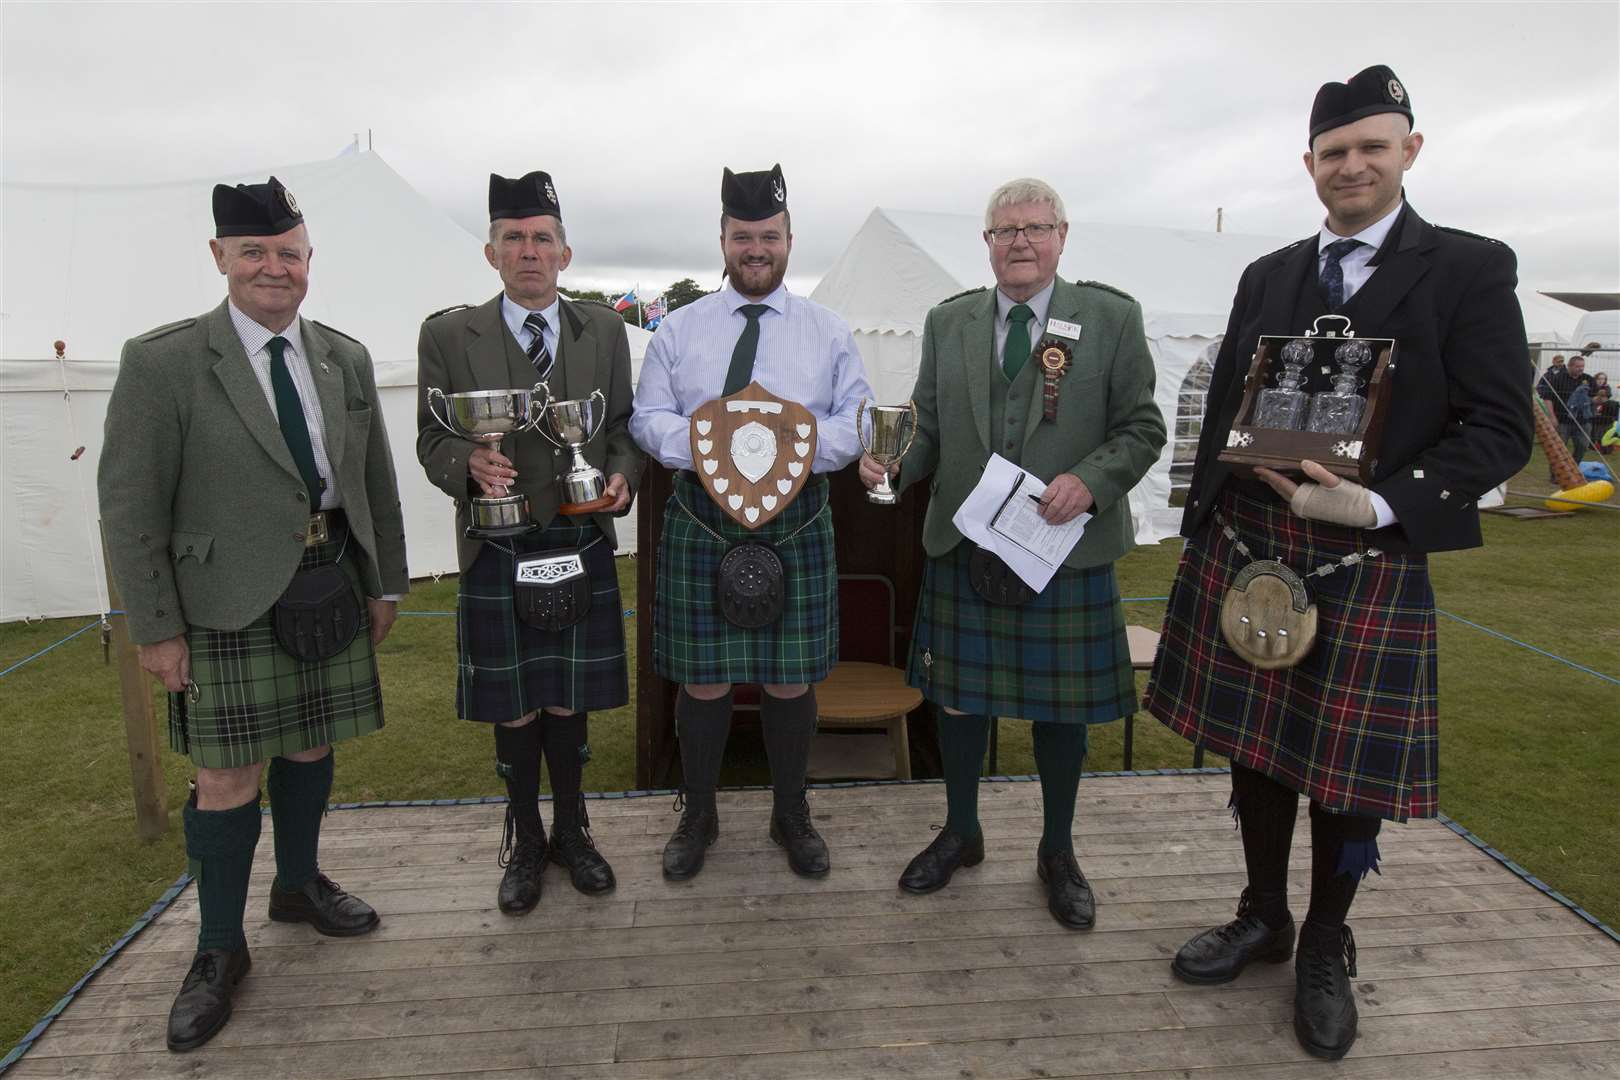 The piping winners were overall champion Brian Lamond (second left), Dunfermline; piobaireachd Angus McPhee (centre), Inverness and Strathspey and Reel Christopher Mcleish (right), Australia. Also in the photograph are judge Archie McLean (left), Inverness, and piping convenor Charlie Swanson. Picture: Robert MacDonald/Northern Studios